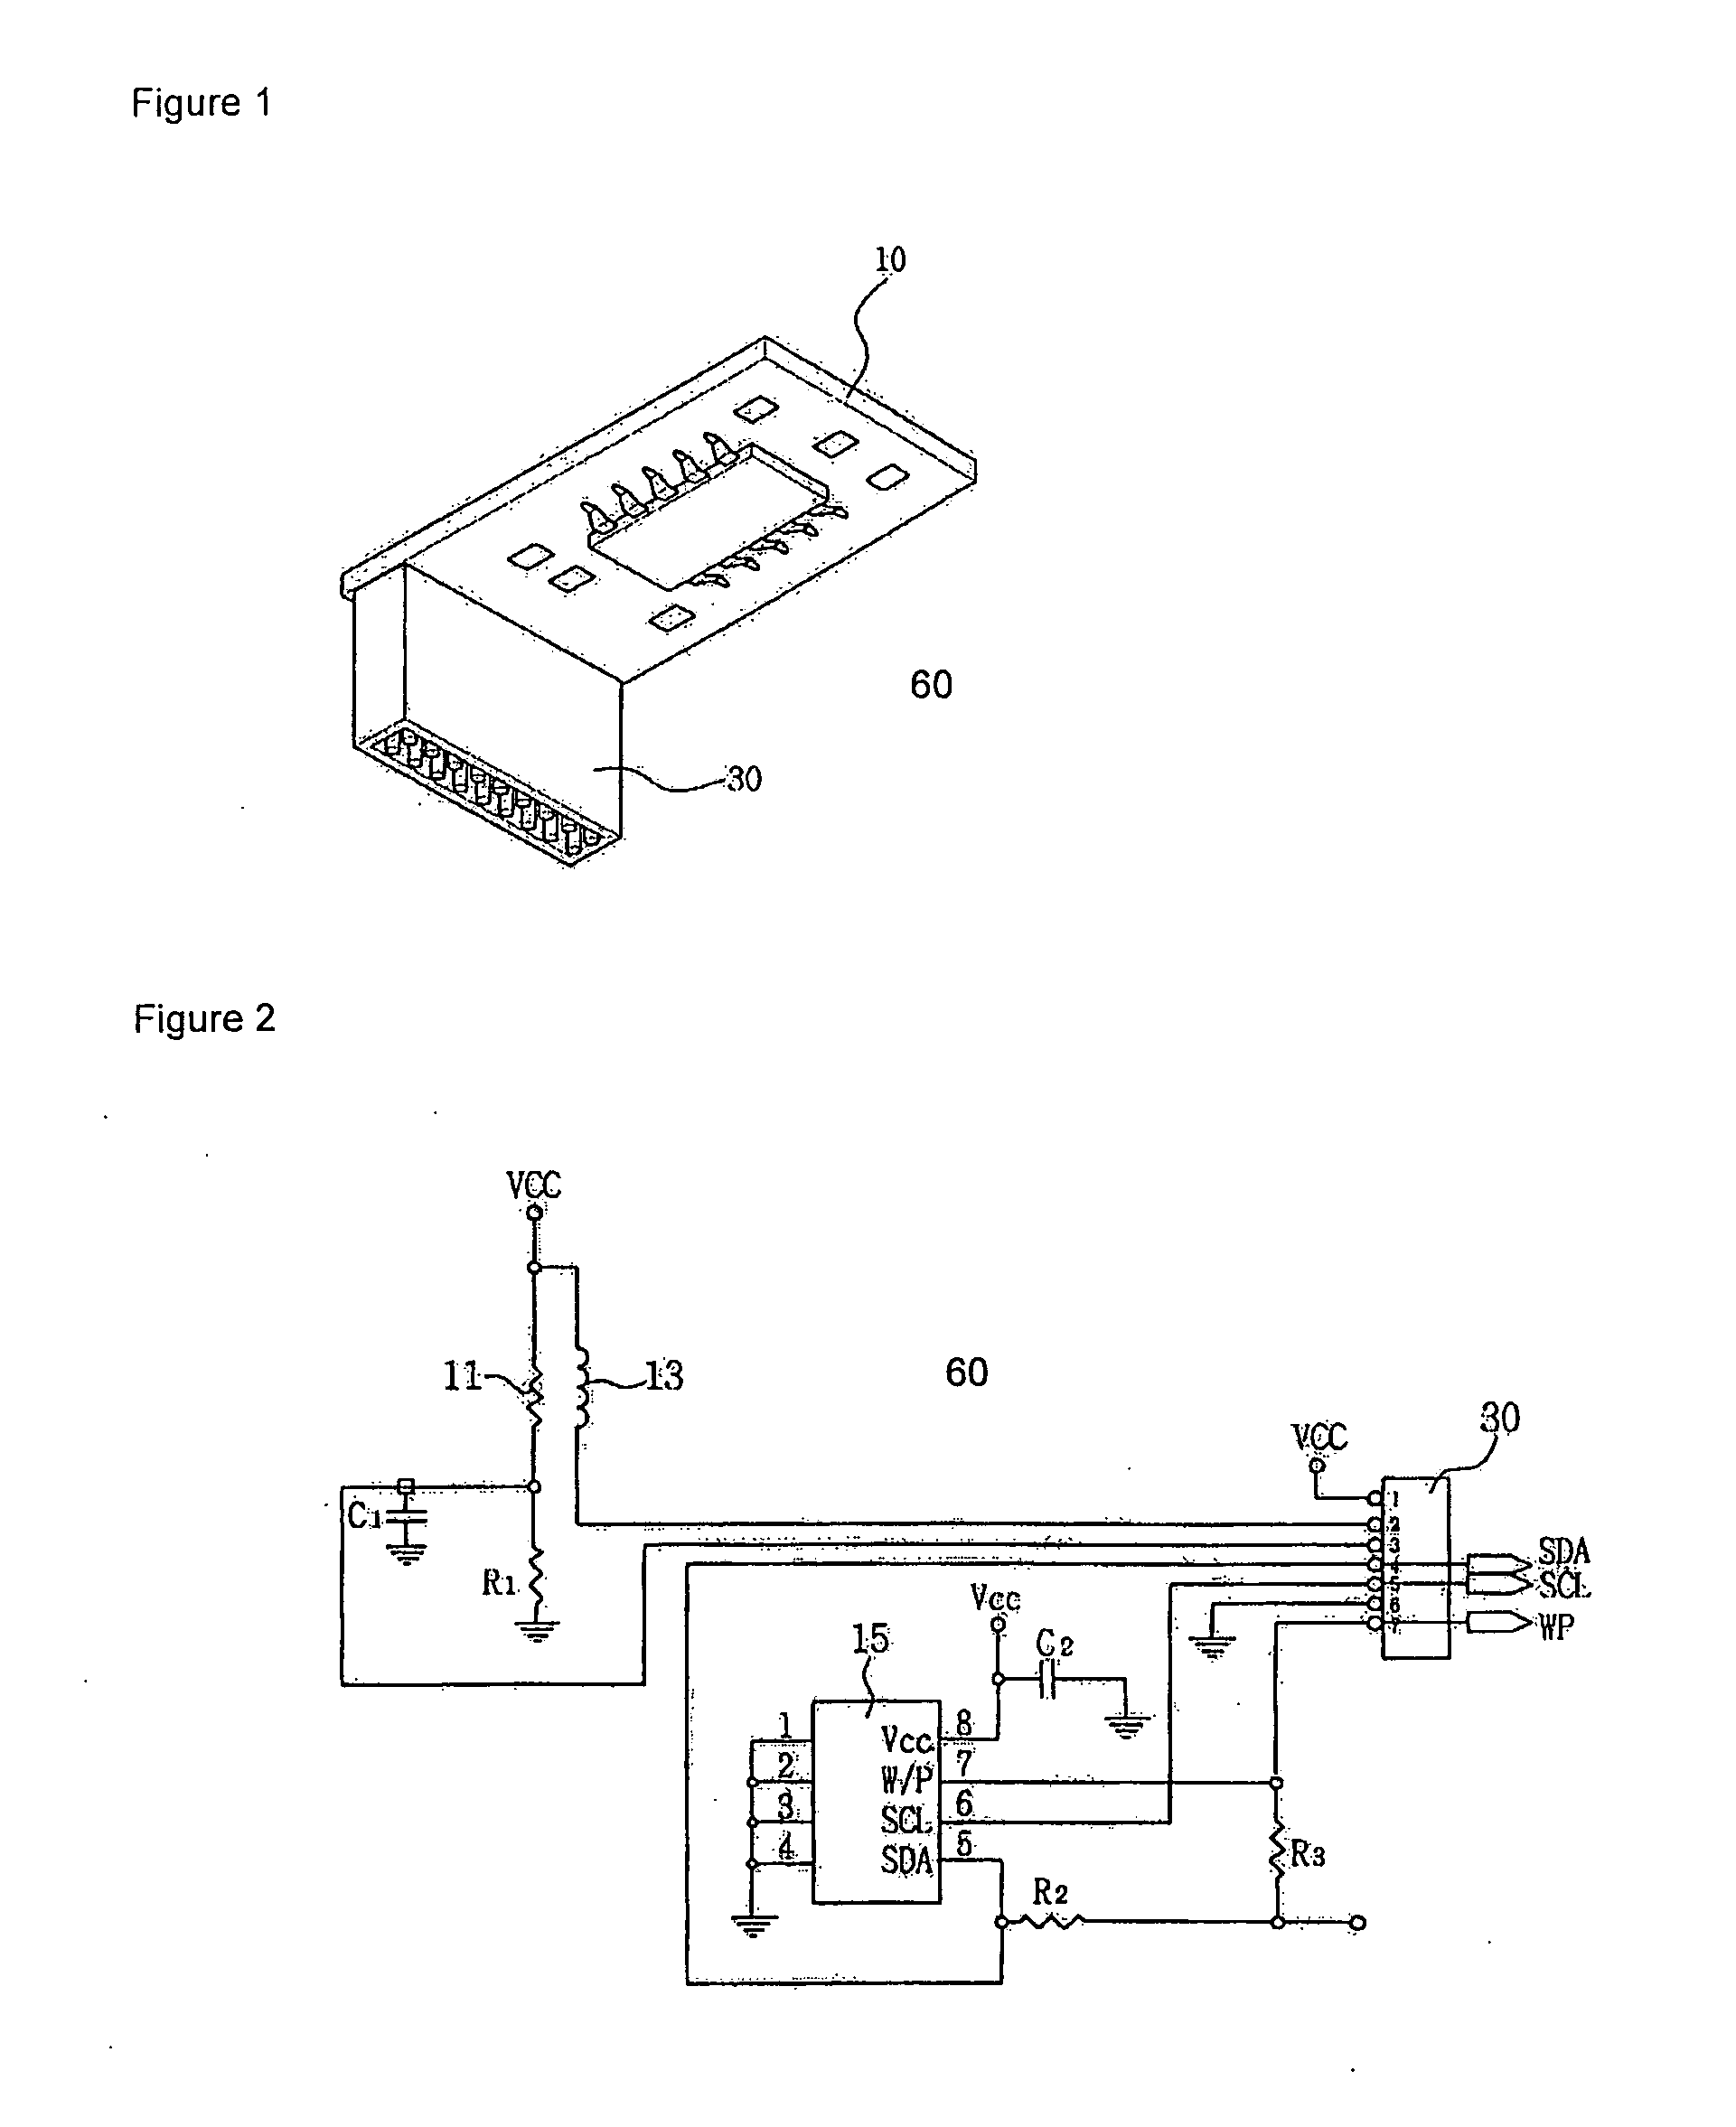 Pre-calibrated replaceable sensor module for a breath alcohol testing device